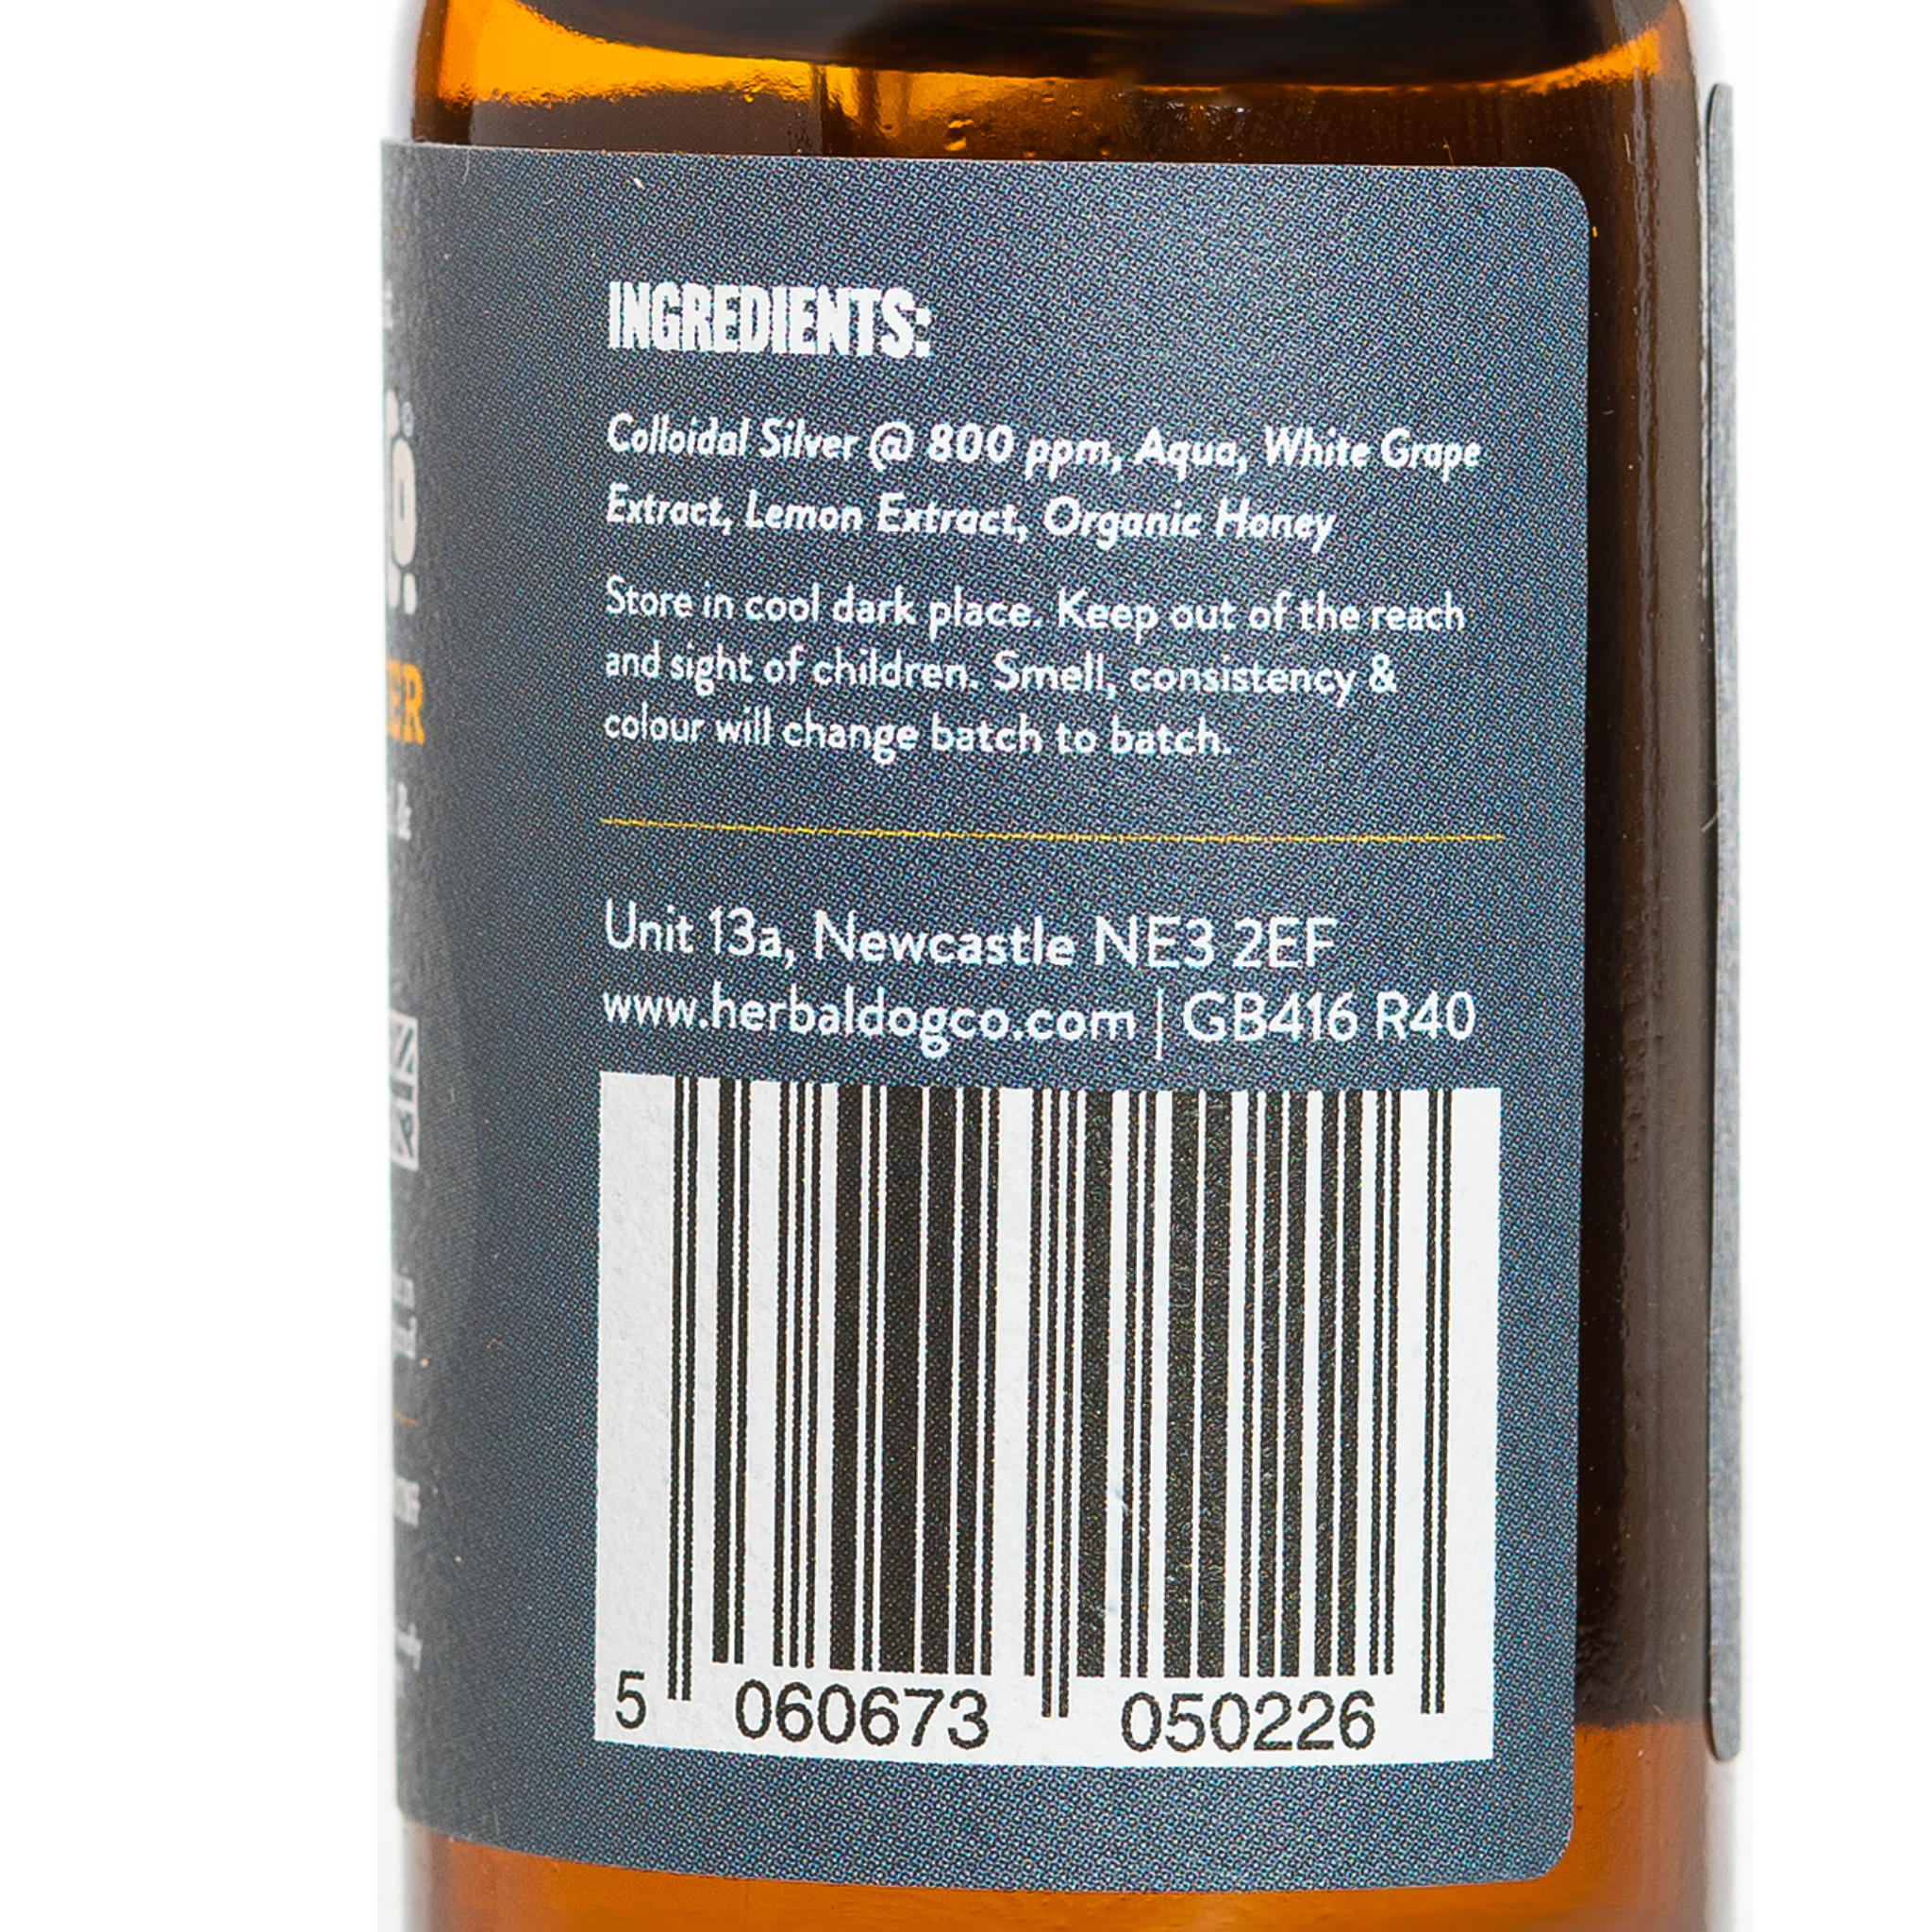 seasonal soother tonic from Herbal dog co. ingredient list from the side of the bottle